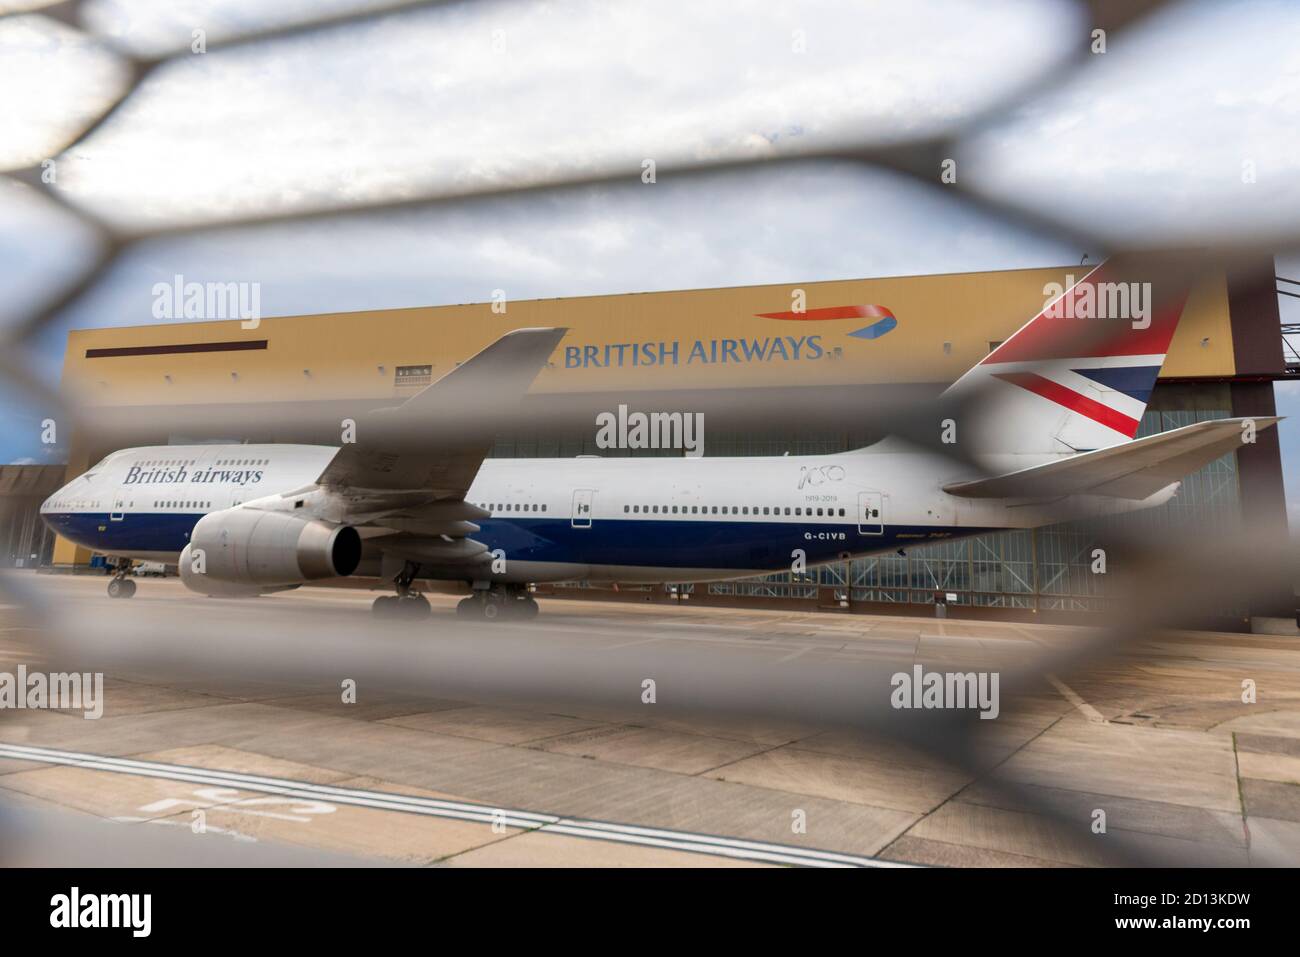 British Airways Boeing 747 Jumbo Jet plane in classic centenary scheme behind fence. Grounded and retired due to COVID-19. Maintenance hangar Stock Photo